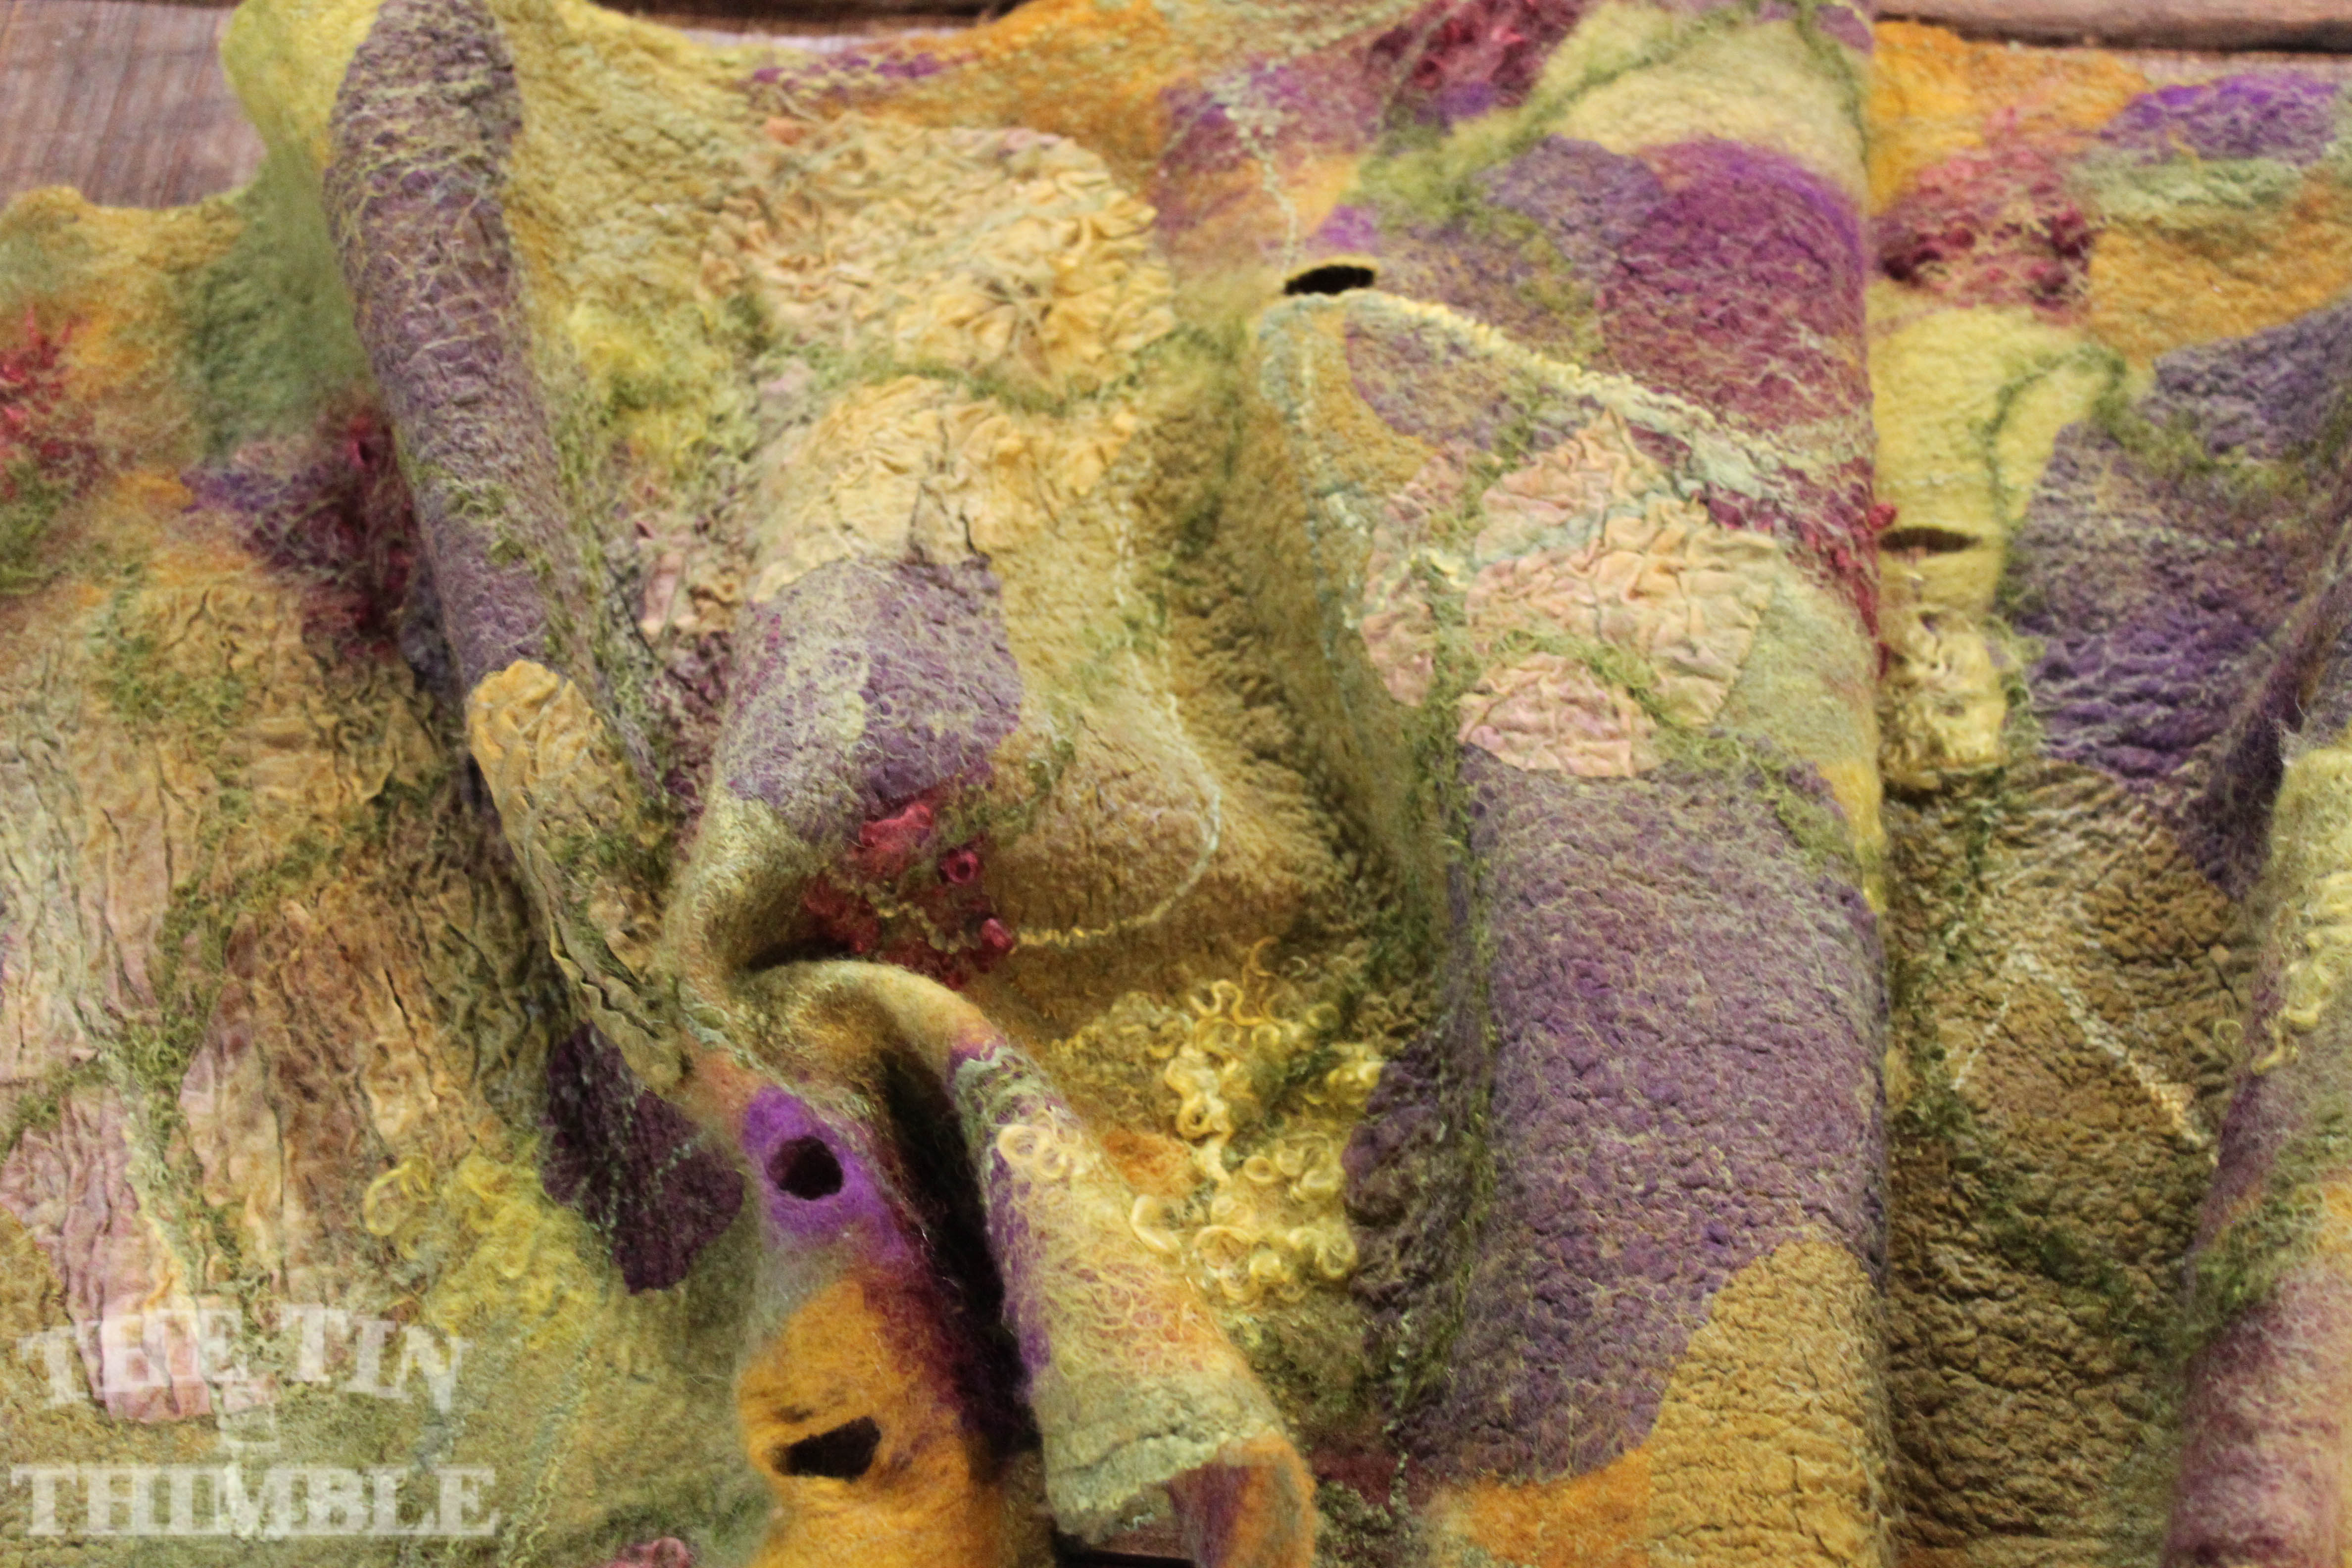 Wet Felted Abstract Collage with Sharon Mansfield